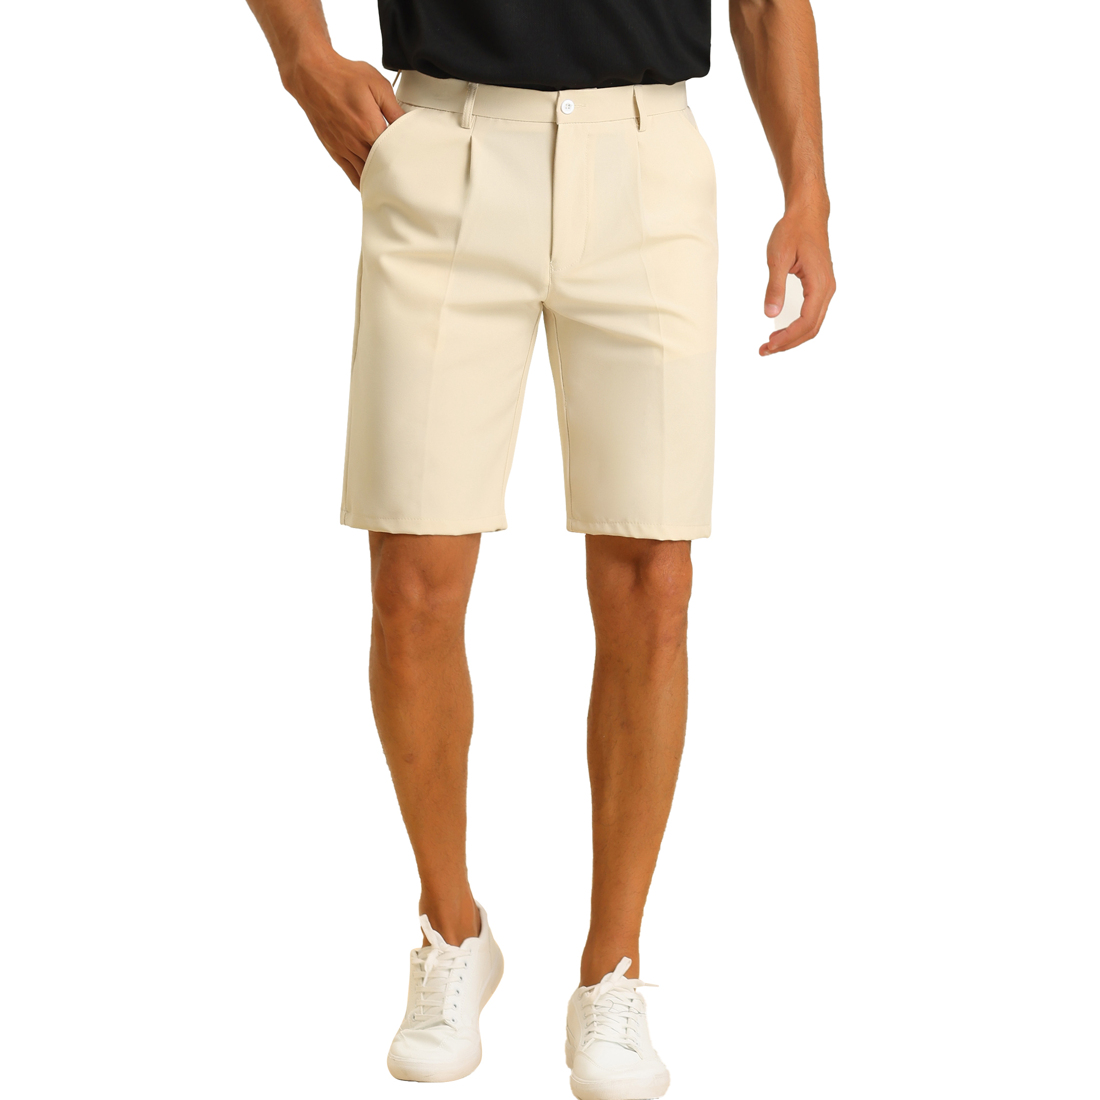 Unique Bargains Chino Shorts for Men's Classic Fit Solid Color Pleated Front Business Shorts